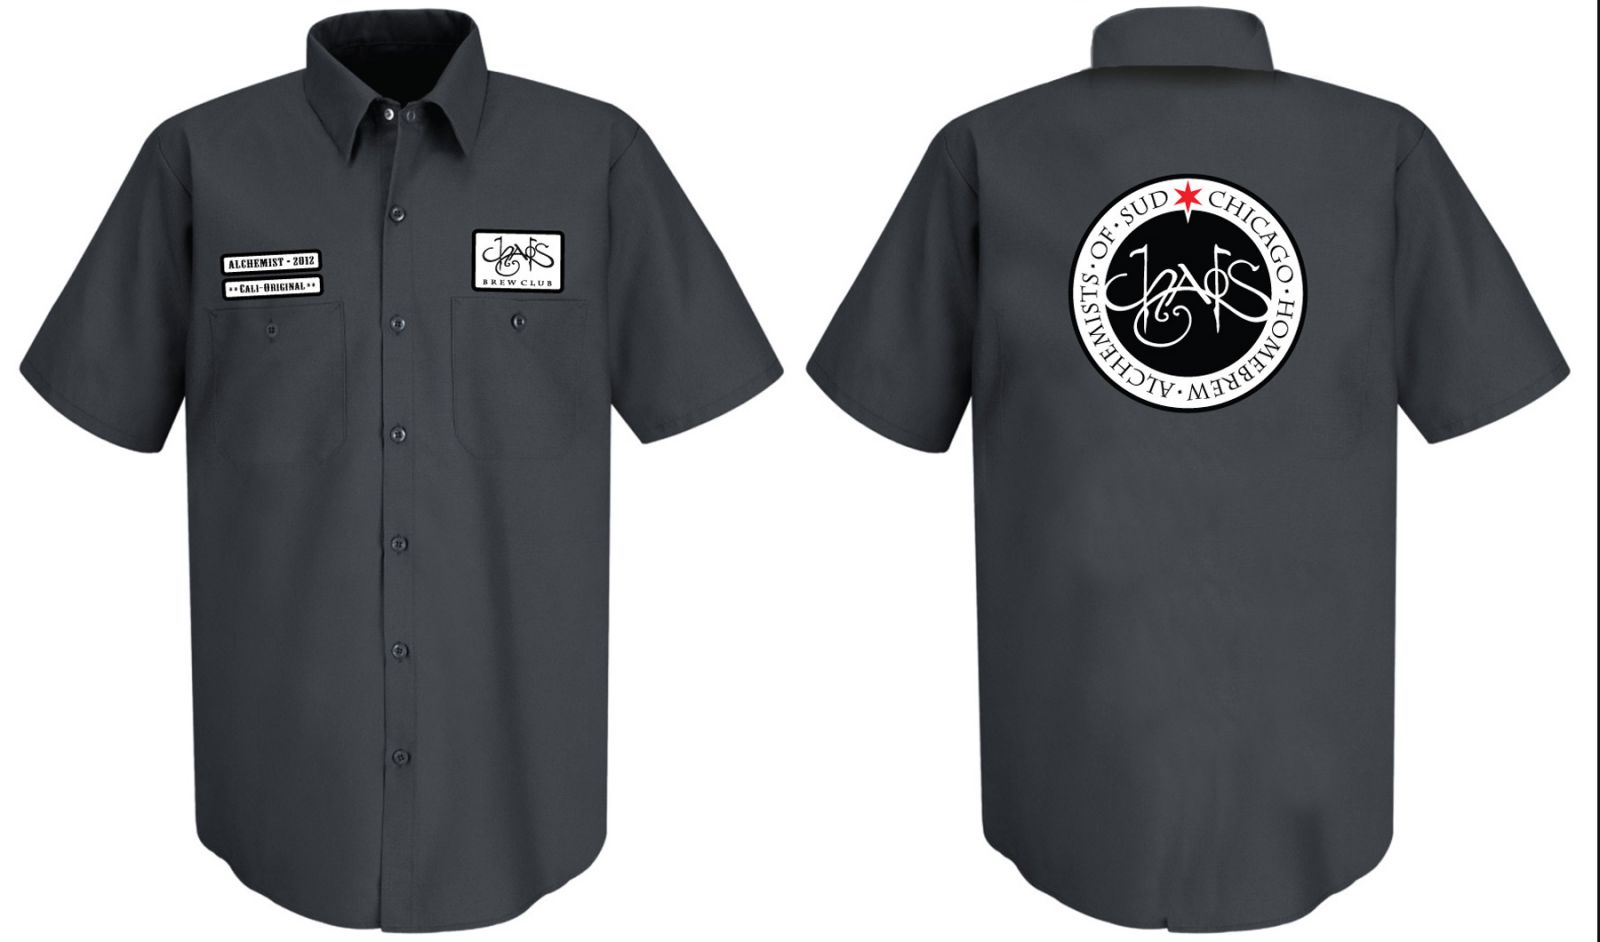 Dickie work shirts discount.